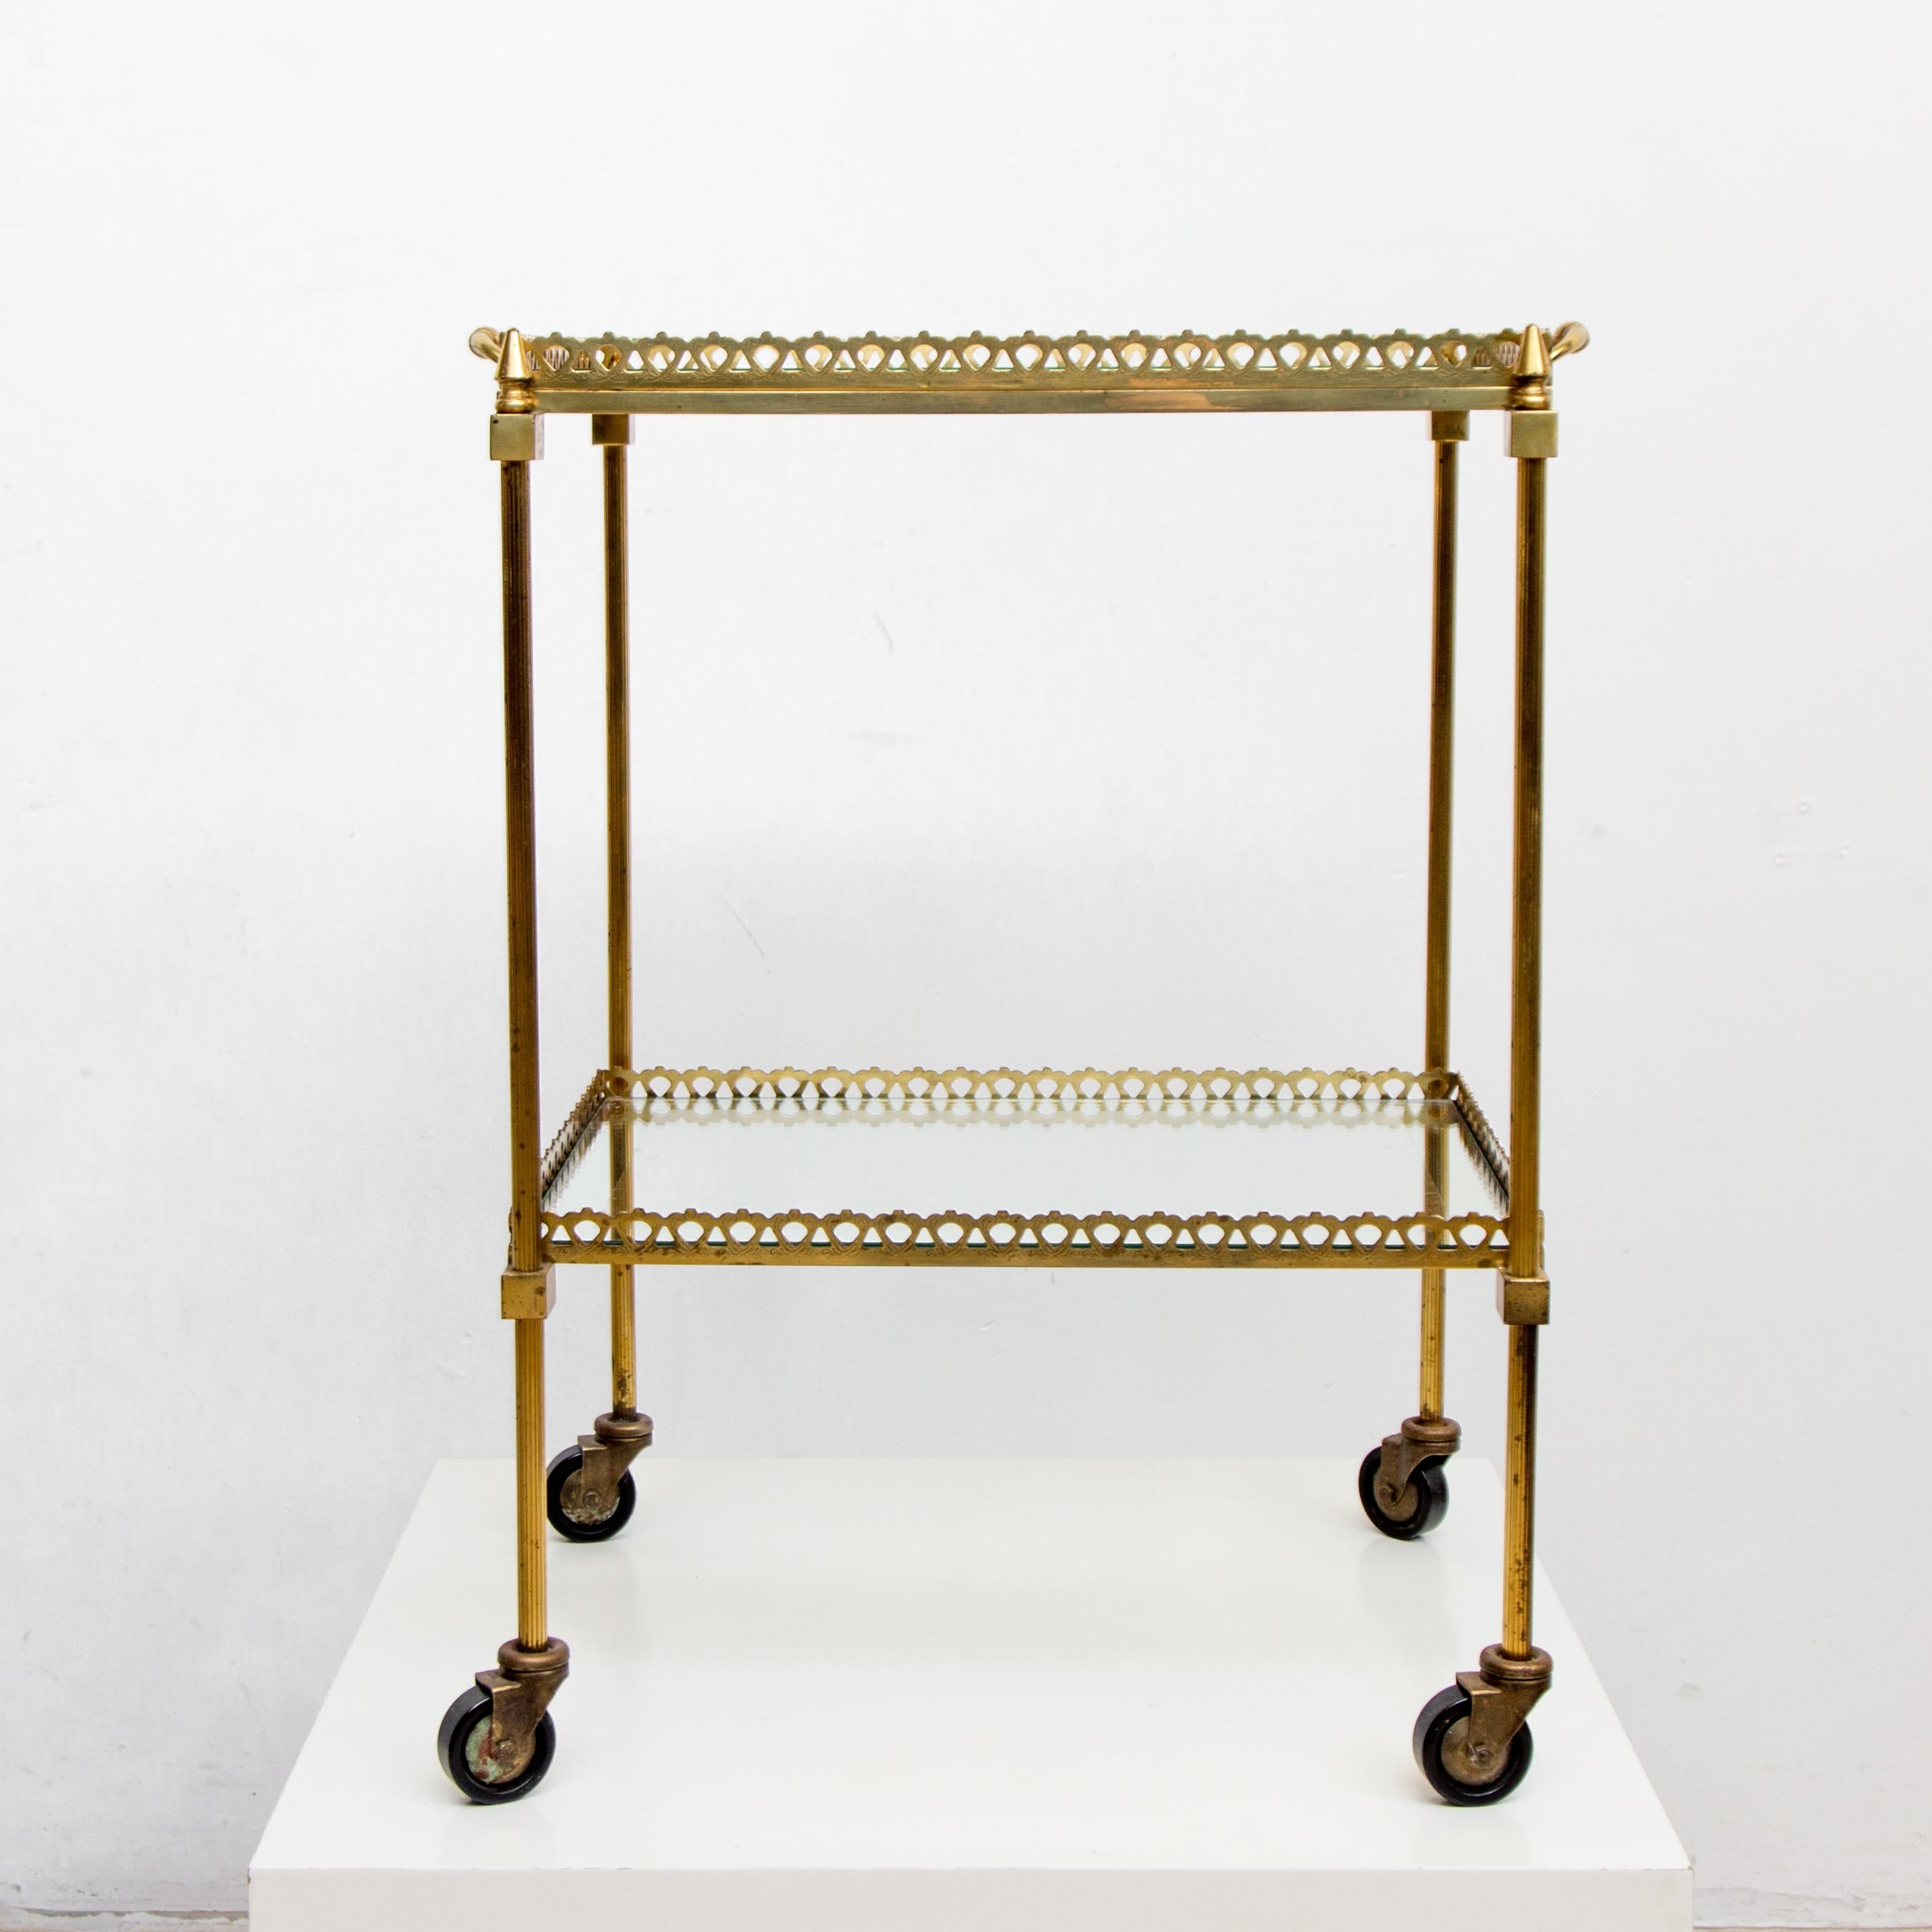 An elegant vintage directoire style rectangular brass and glass cocktail cart with separate serving tray top. Circa 1960s. Glass top is inset and has mirrored edge detail. In good aged vintage condition.